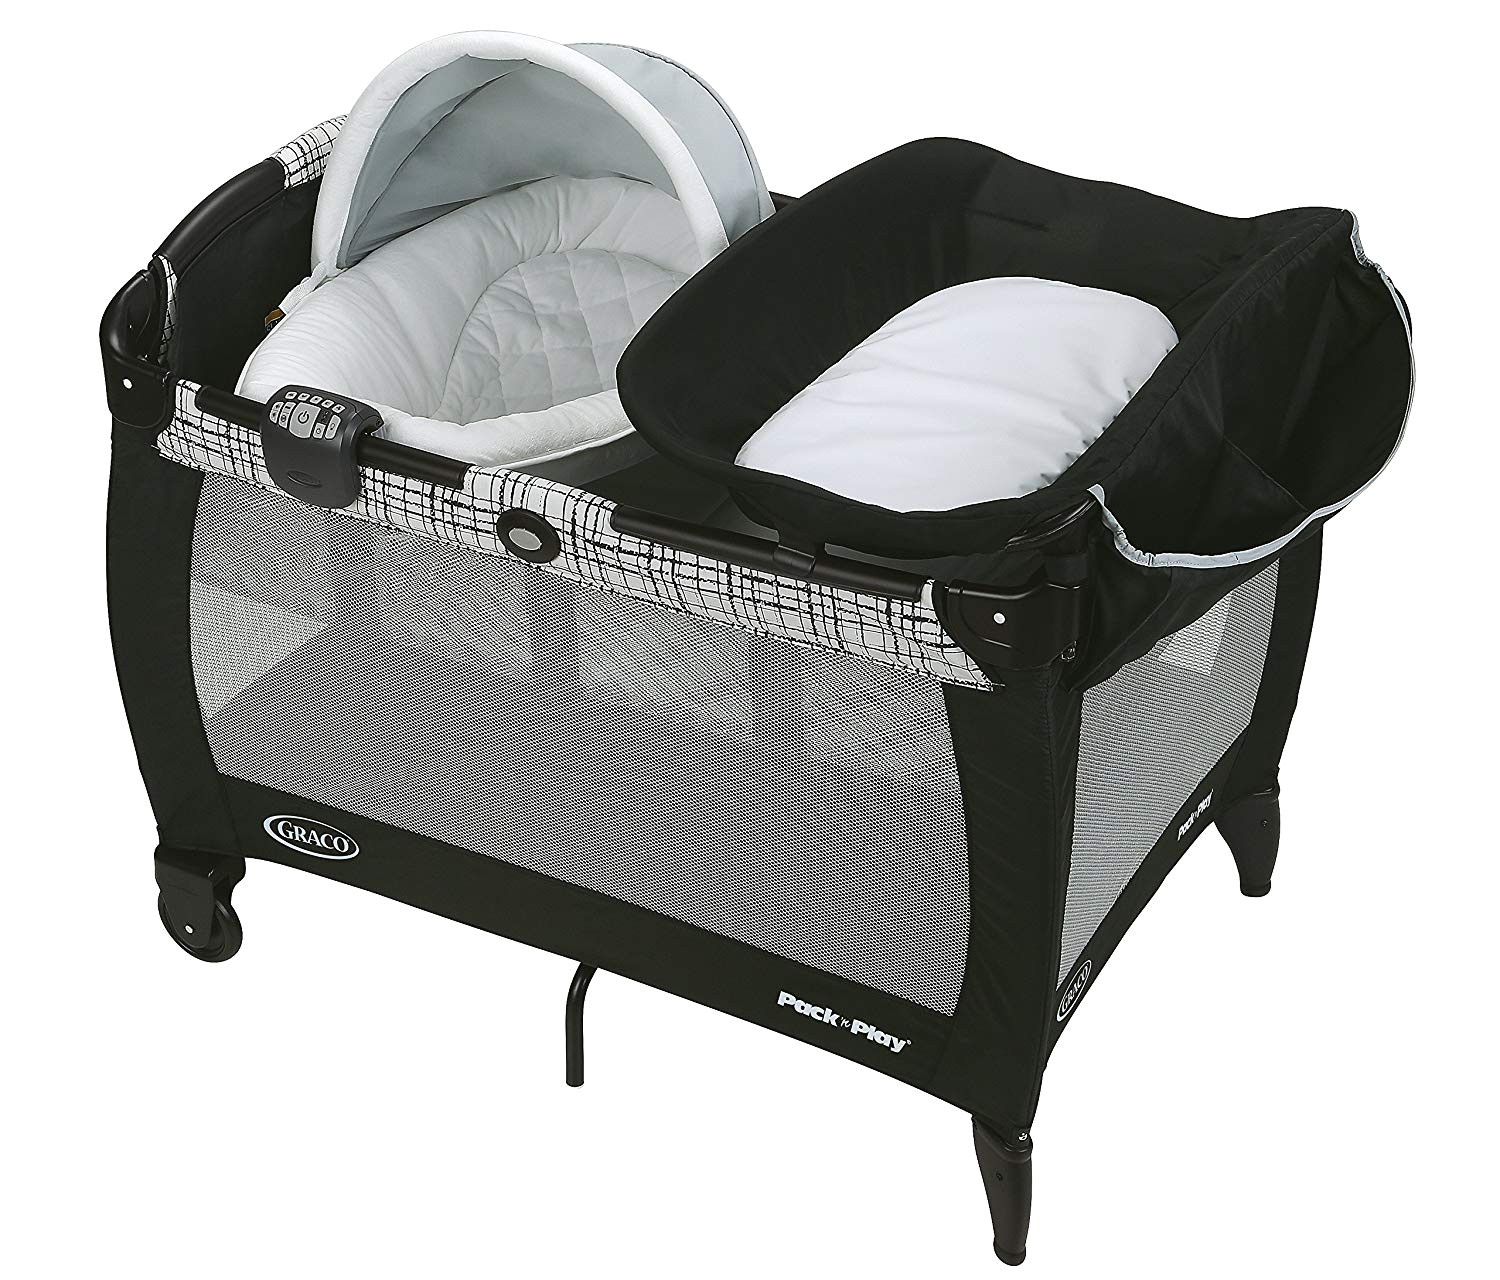 amazon com graco pack n play newborn napper oasis with soothe surround technology teigen baby